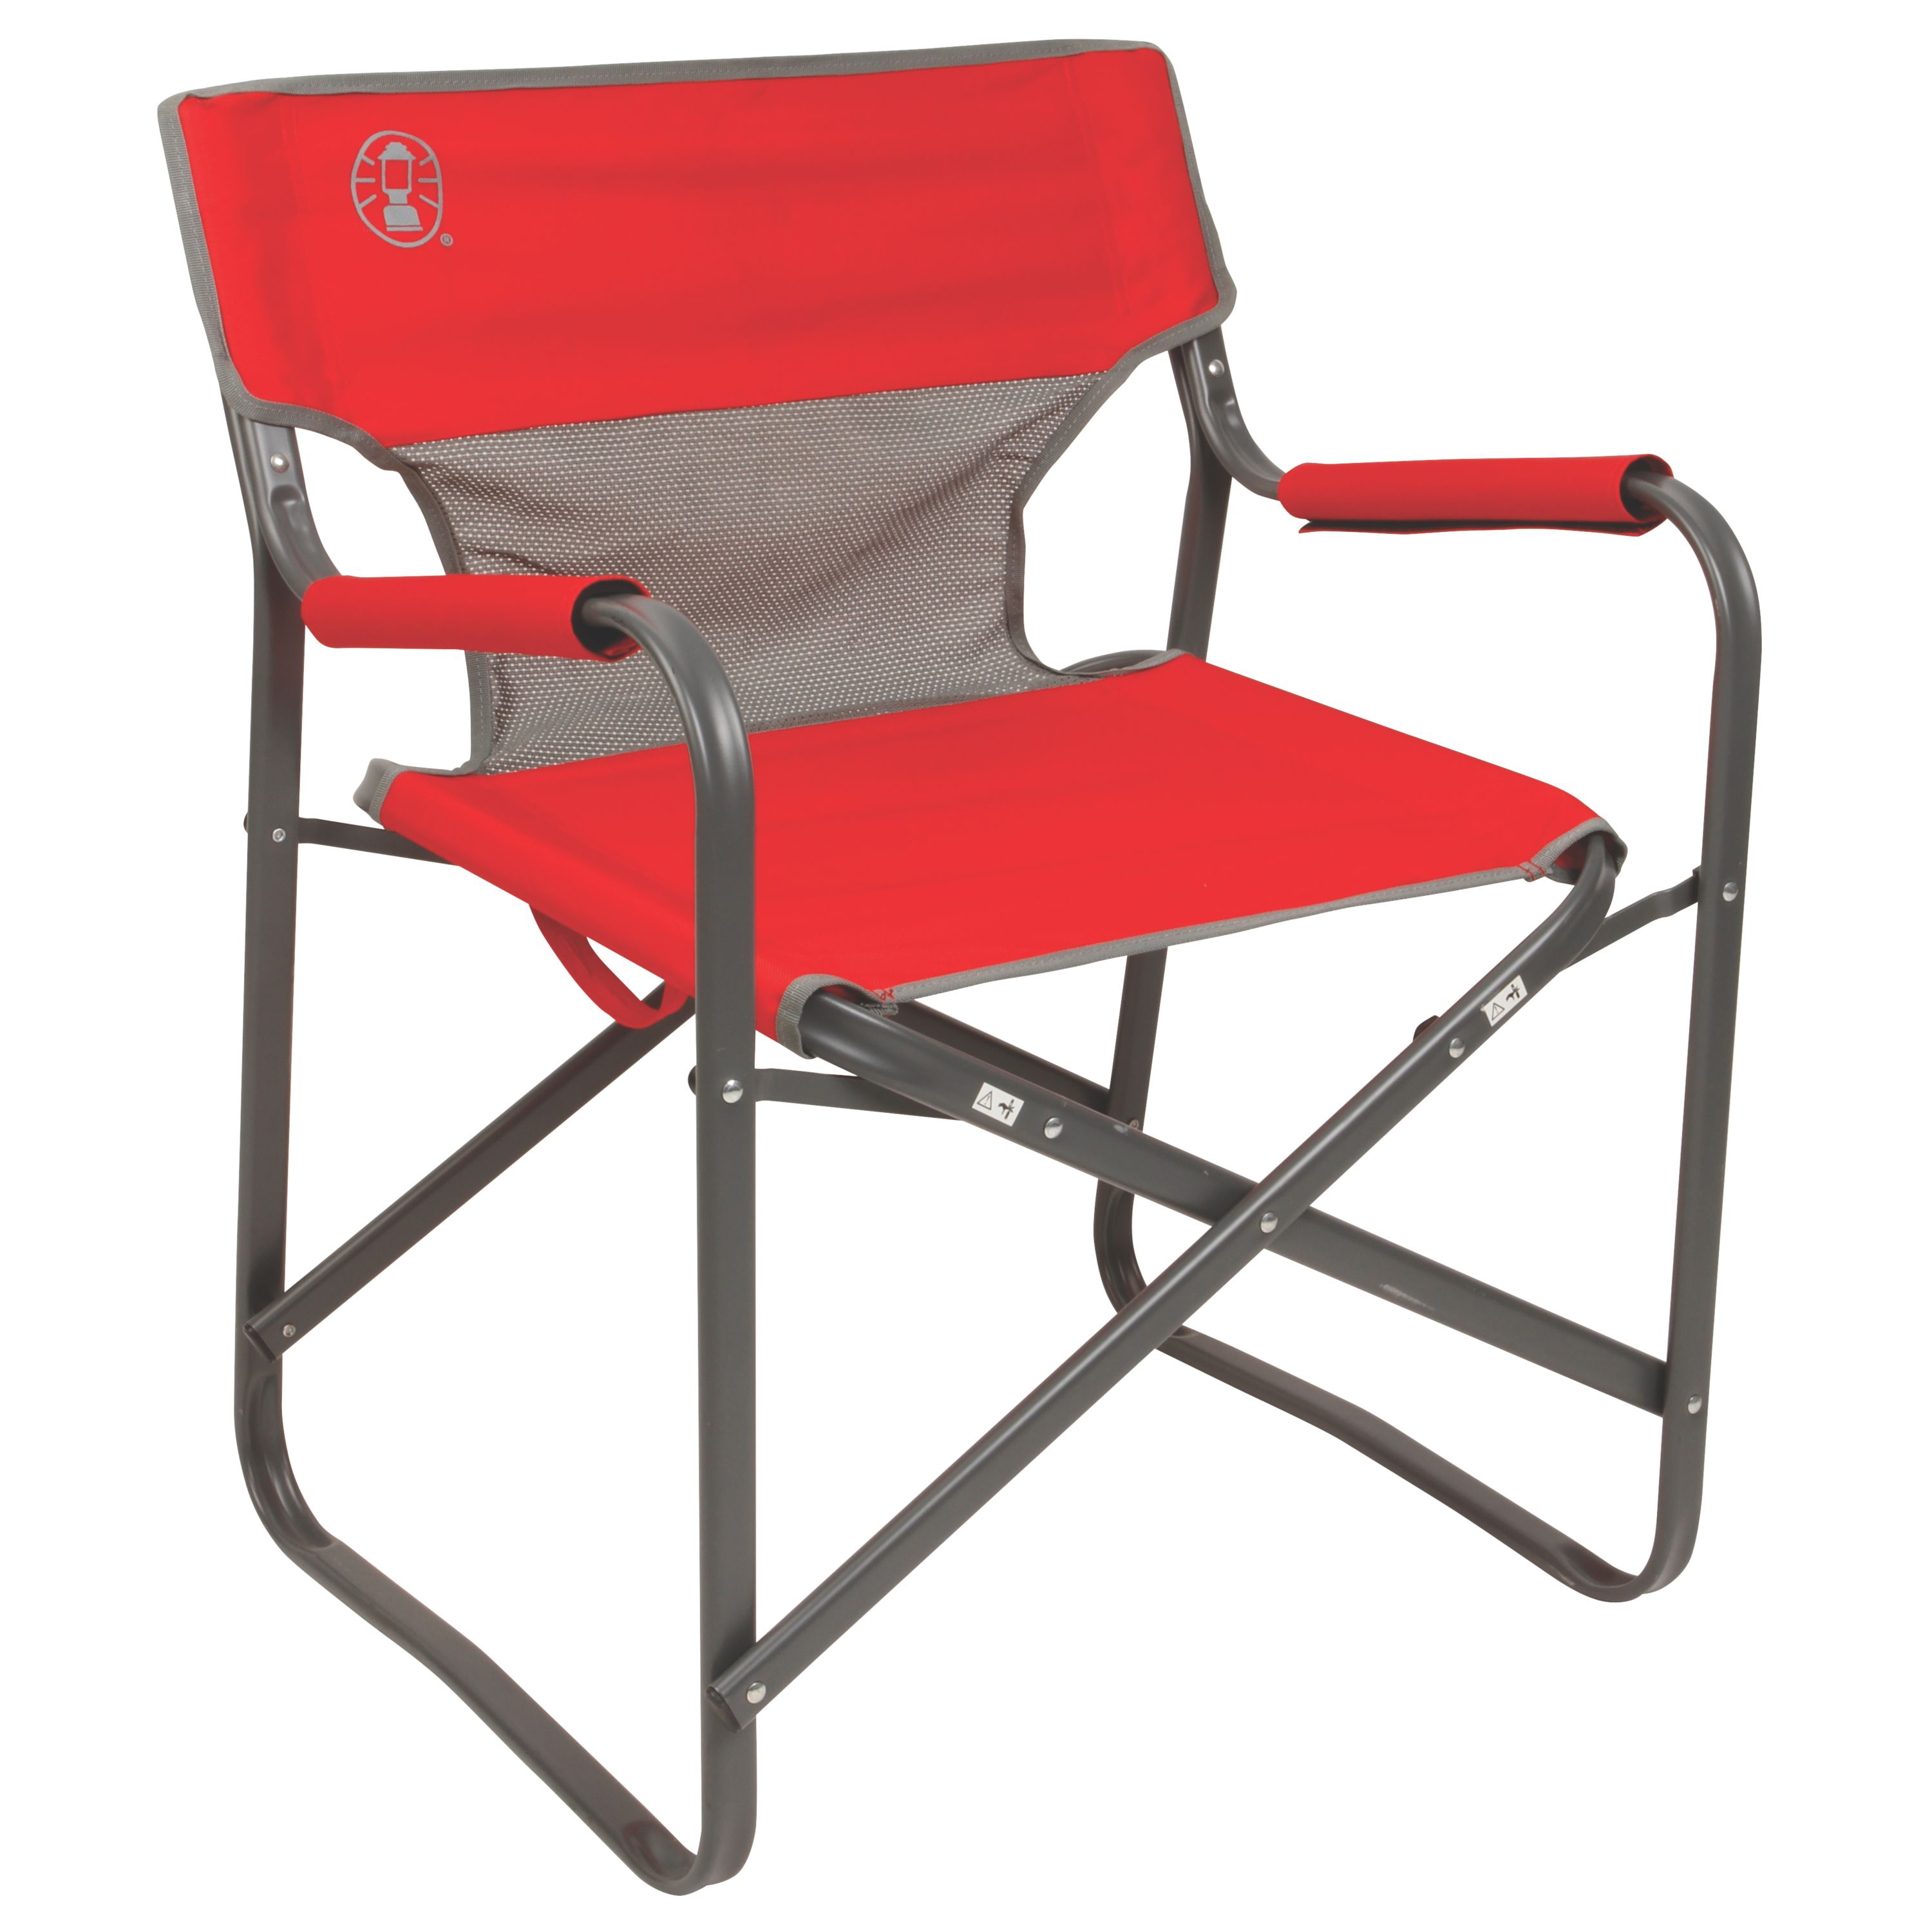 Coleman Outpost Breeze Folding Adult Deck Chair, Red - image 1 of 2